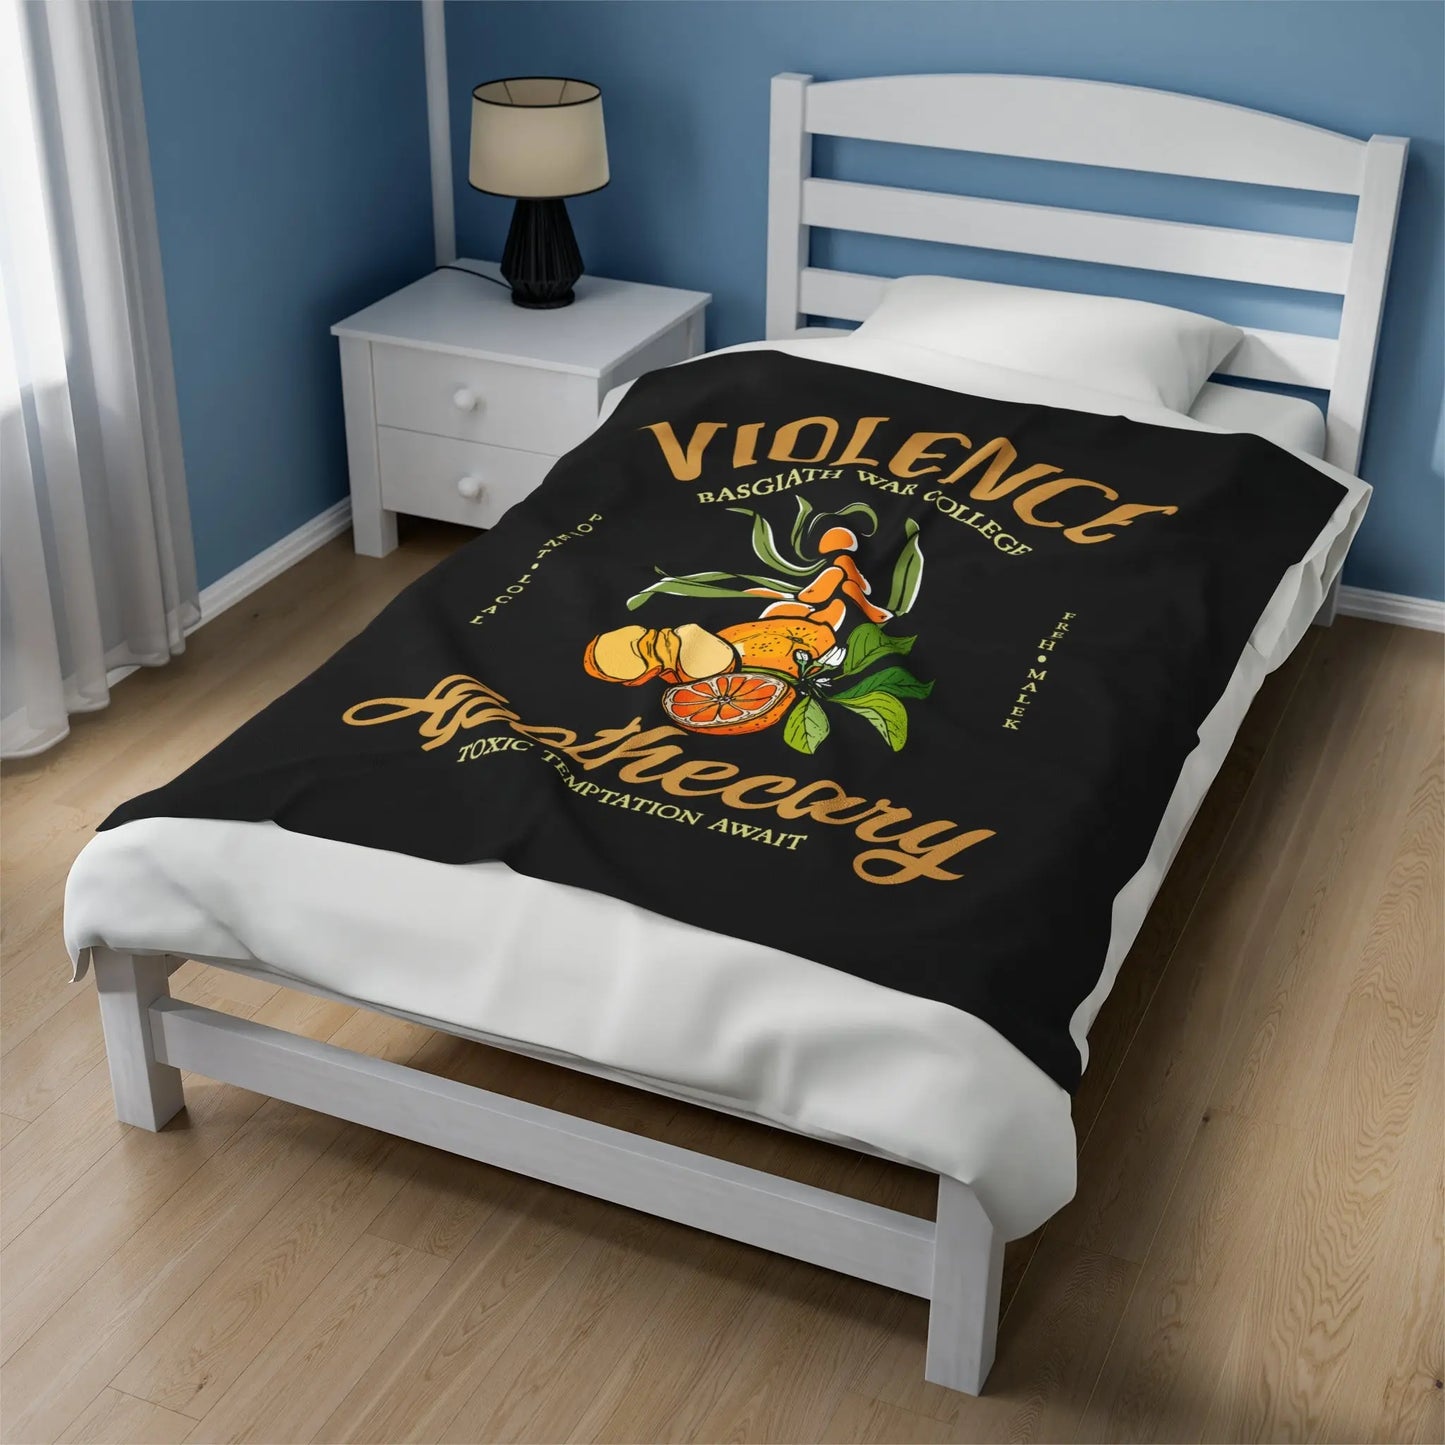 Fourth Wing Iron Flame Vintage-Style Violence Basgiath War College Apothecary Throw Blanket | Inspired by Rebecca Yarros - Stay Tomorrow Needs You